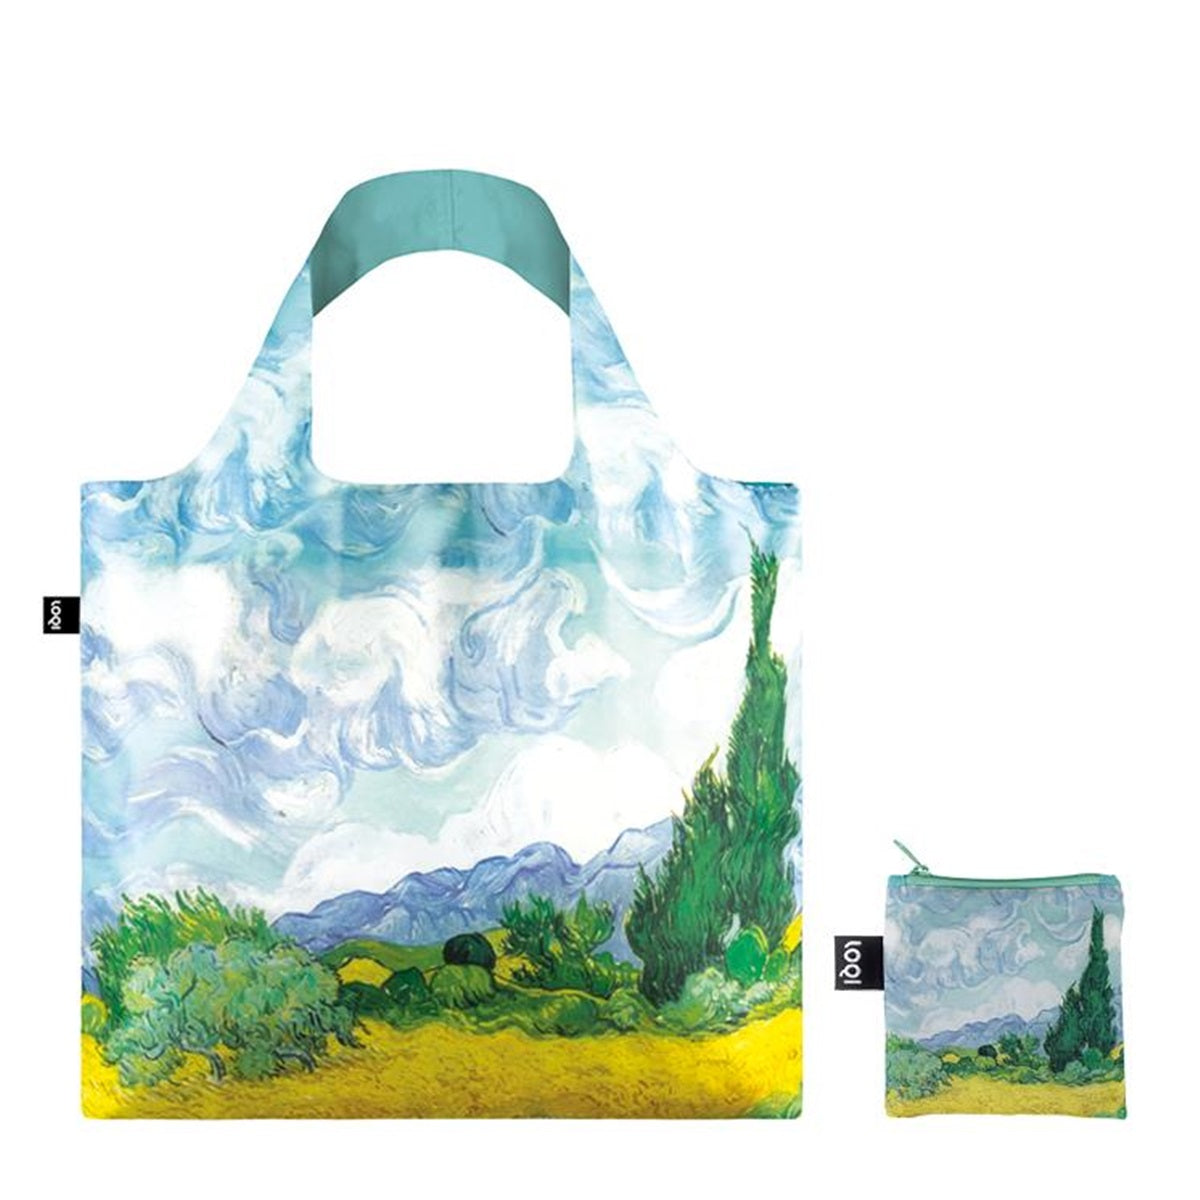 LOQI Museum Vincent Van Gogh's A Wheat Field with Cypresses Reusable Shopping Bag